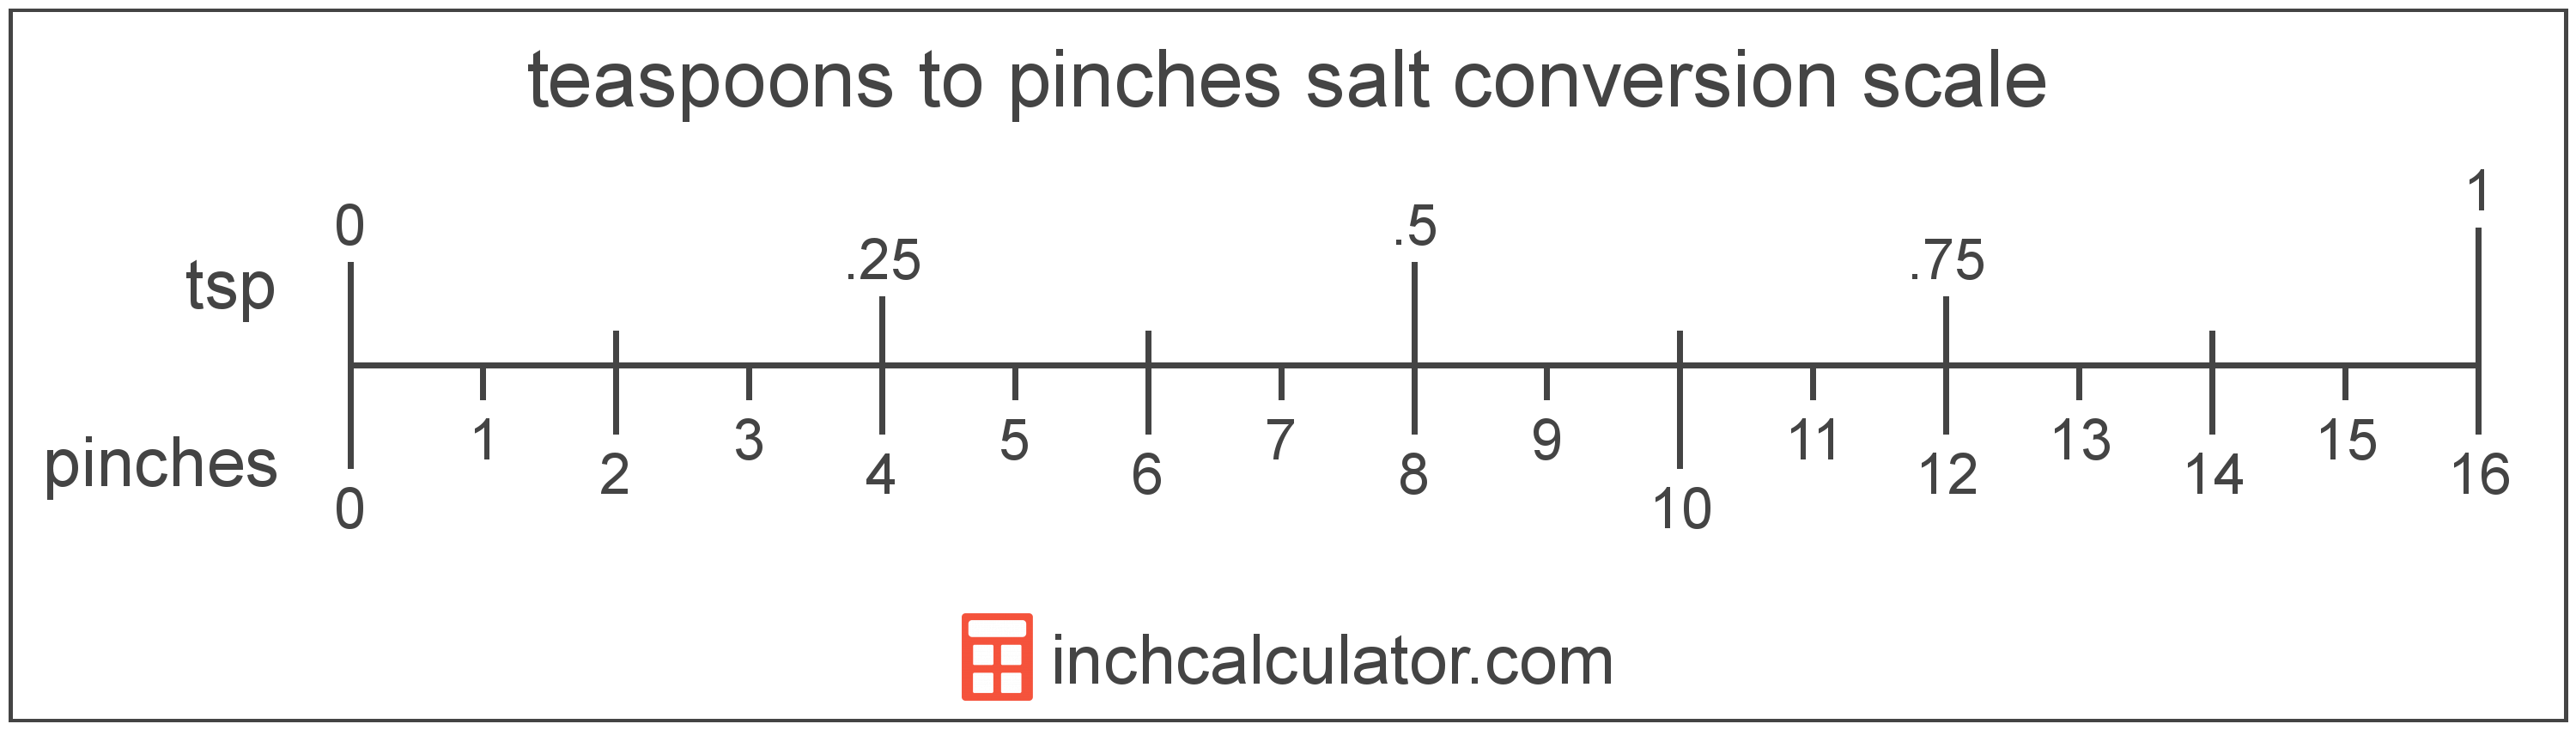 conversion scale showing teaspoons and equivalent pinches salt volume values